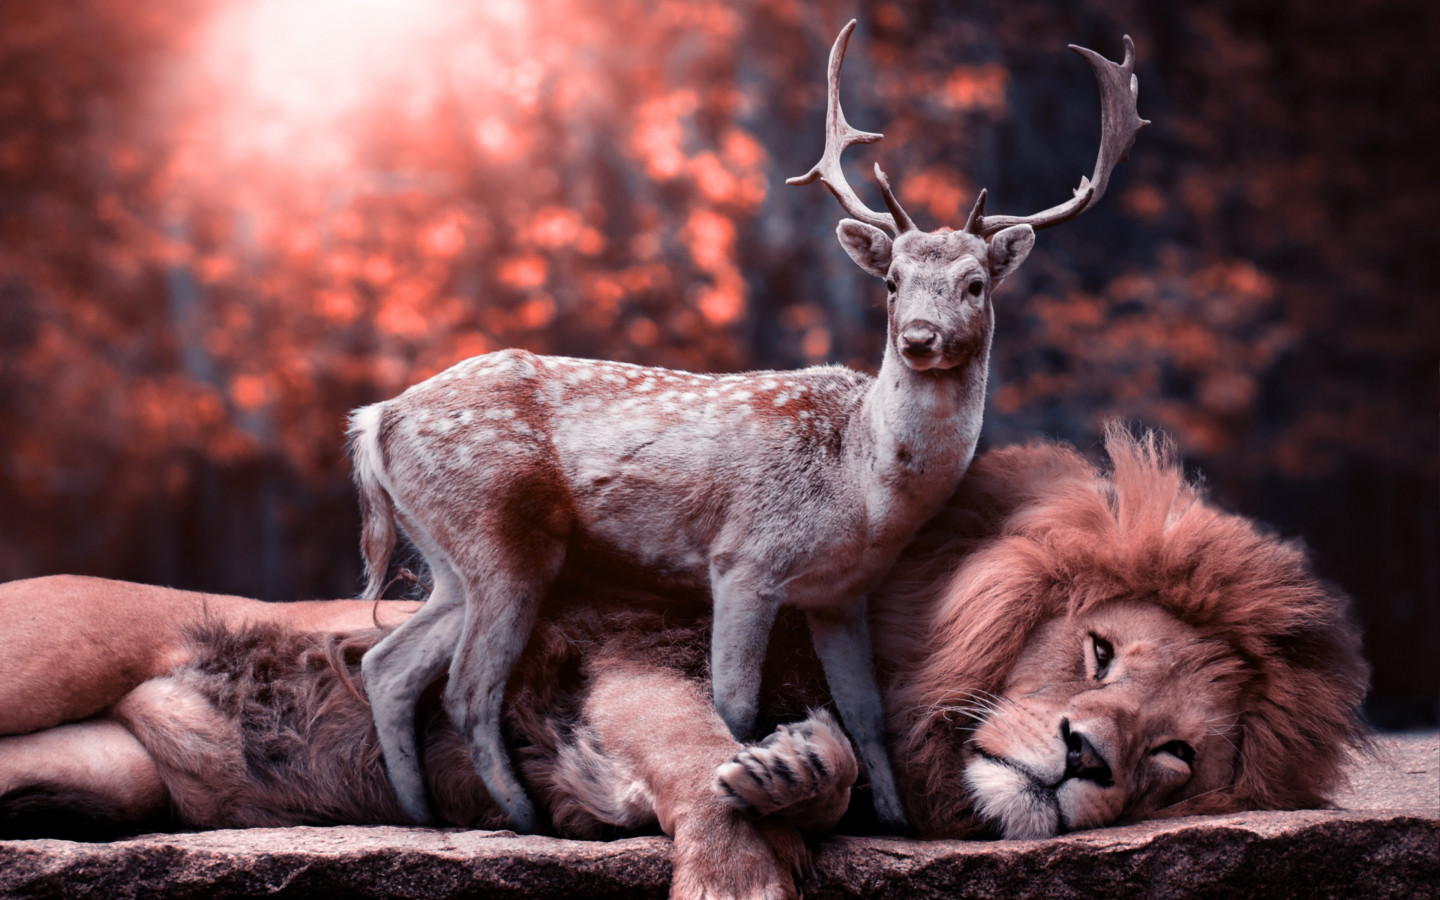 The lion and the deer wallpaper 1440x900